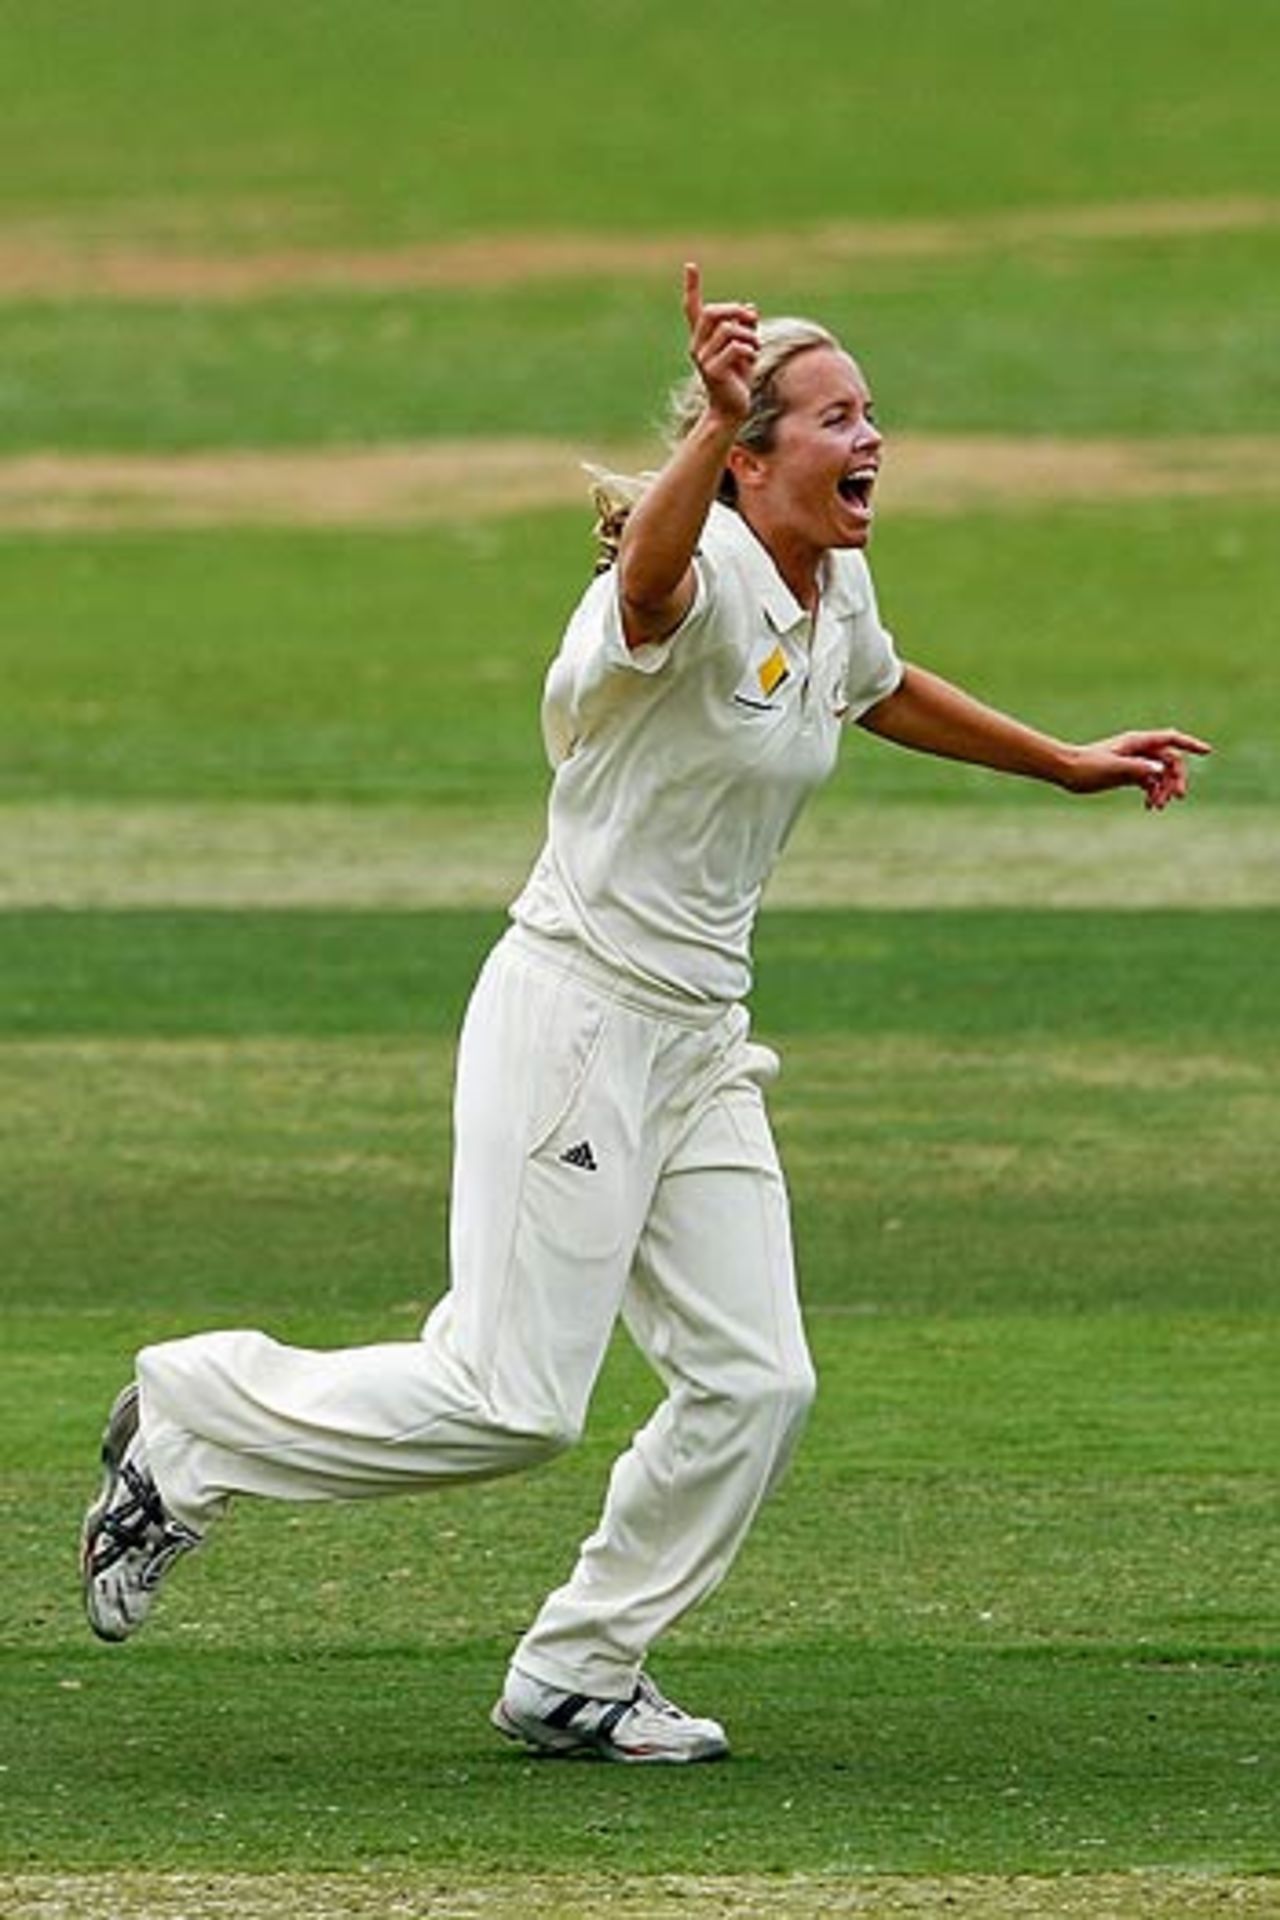 Julie Hayes celebrates a wicket as India capitulate, Australia Women v India Women, Only Test, Adelaide, Feb 19, 2006